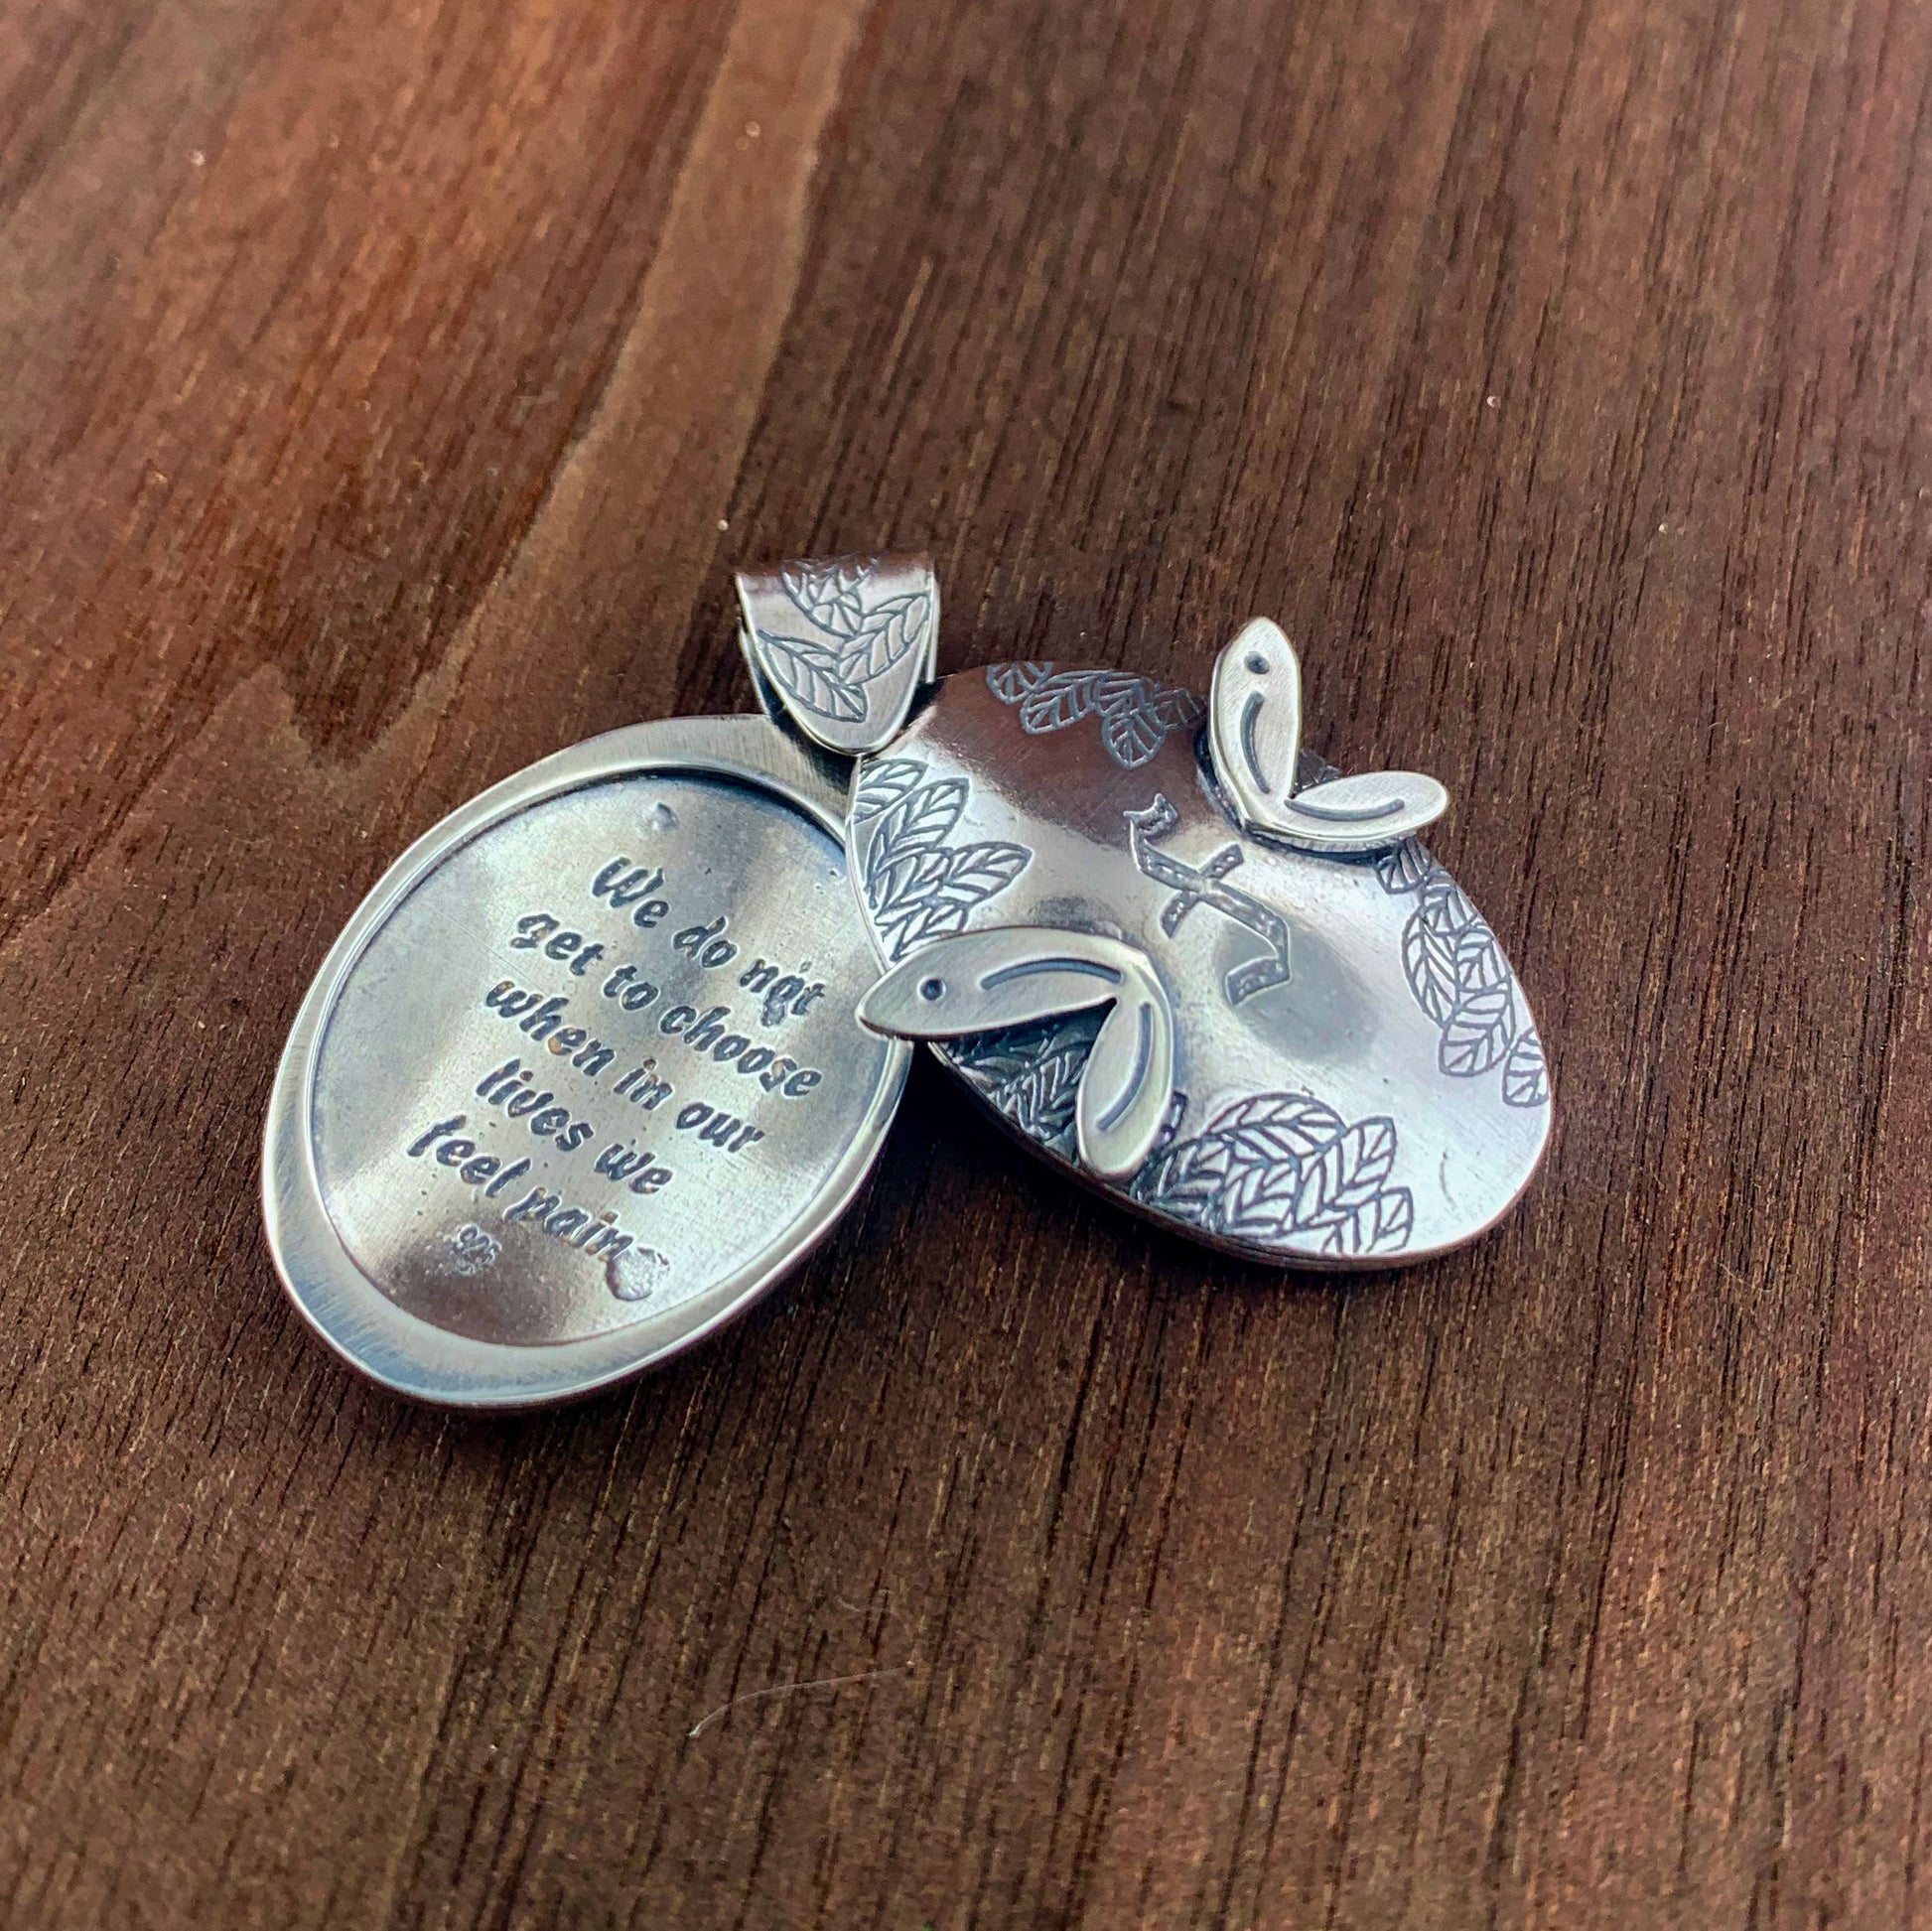 Fairchild custom silver locket and quote